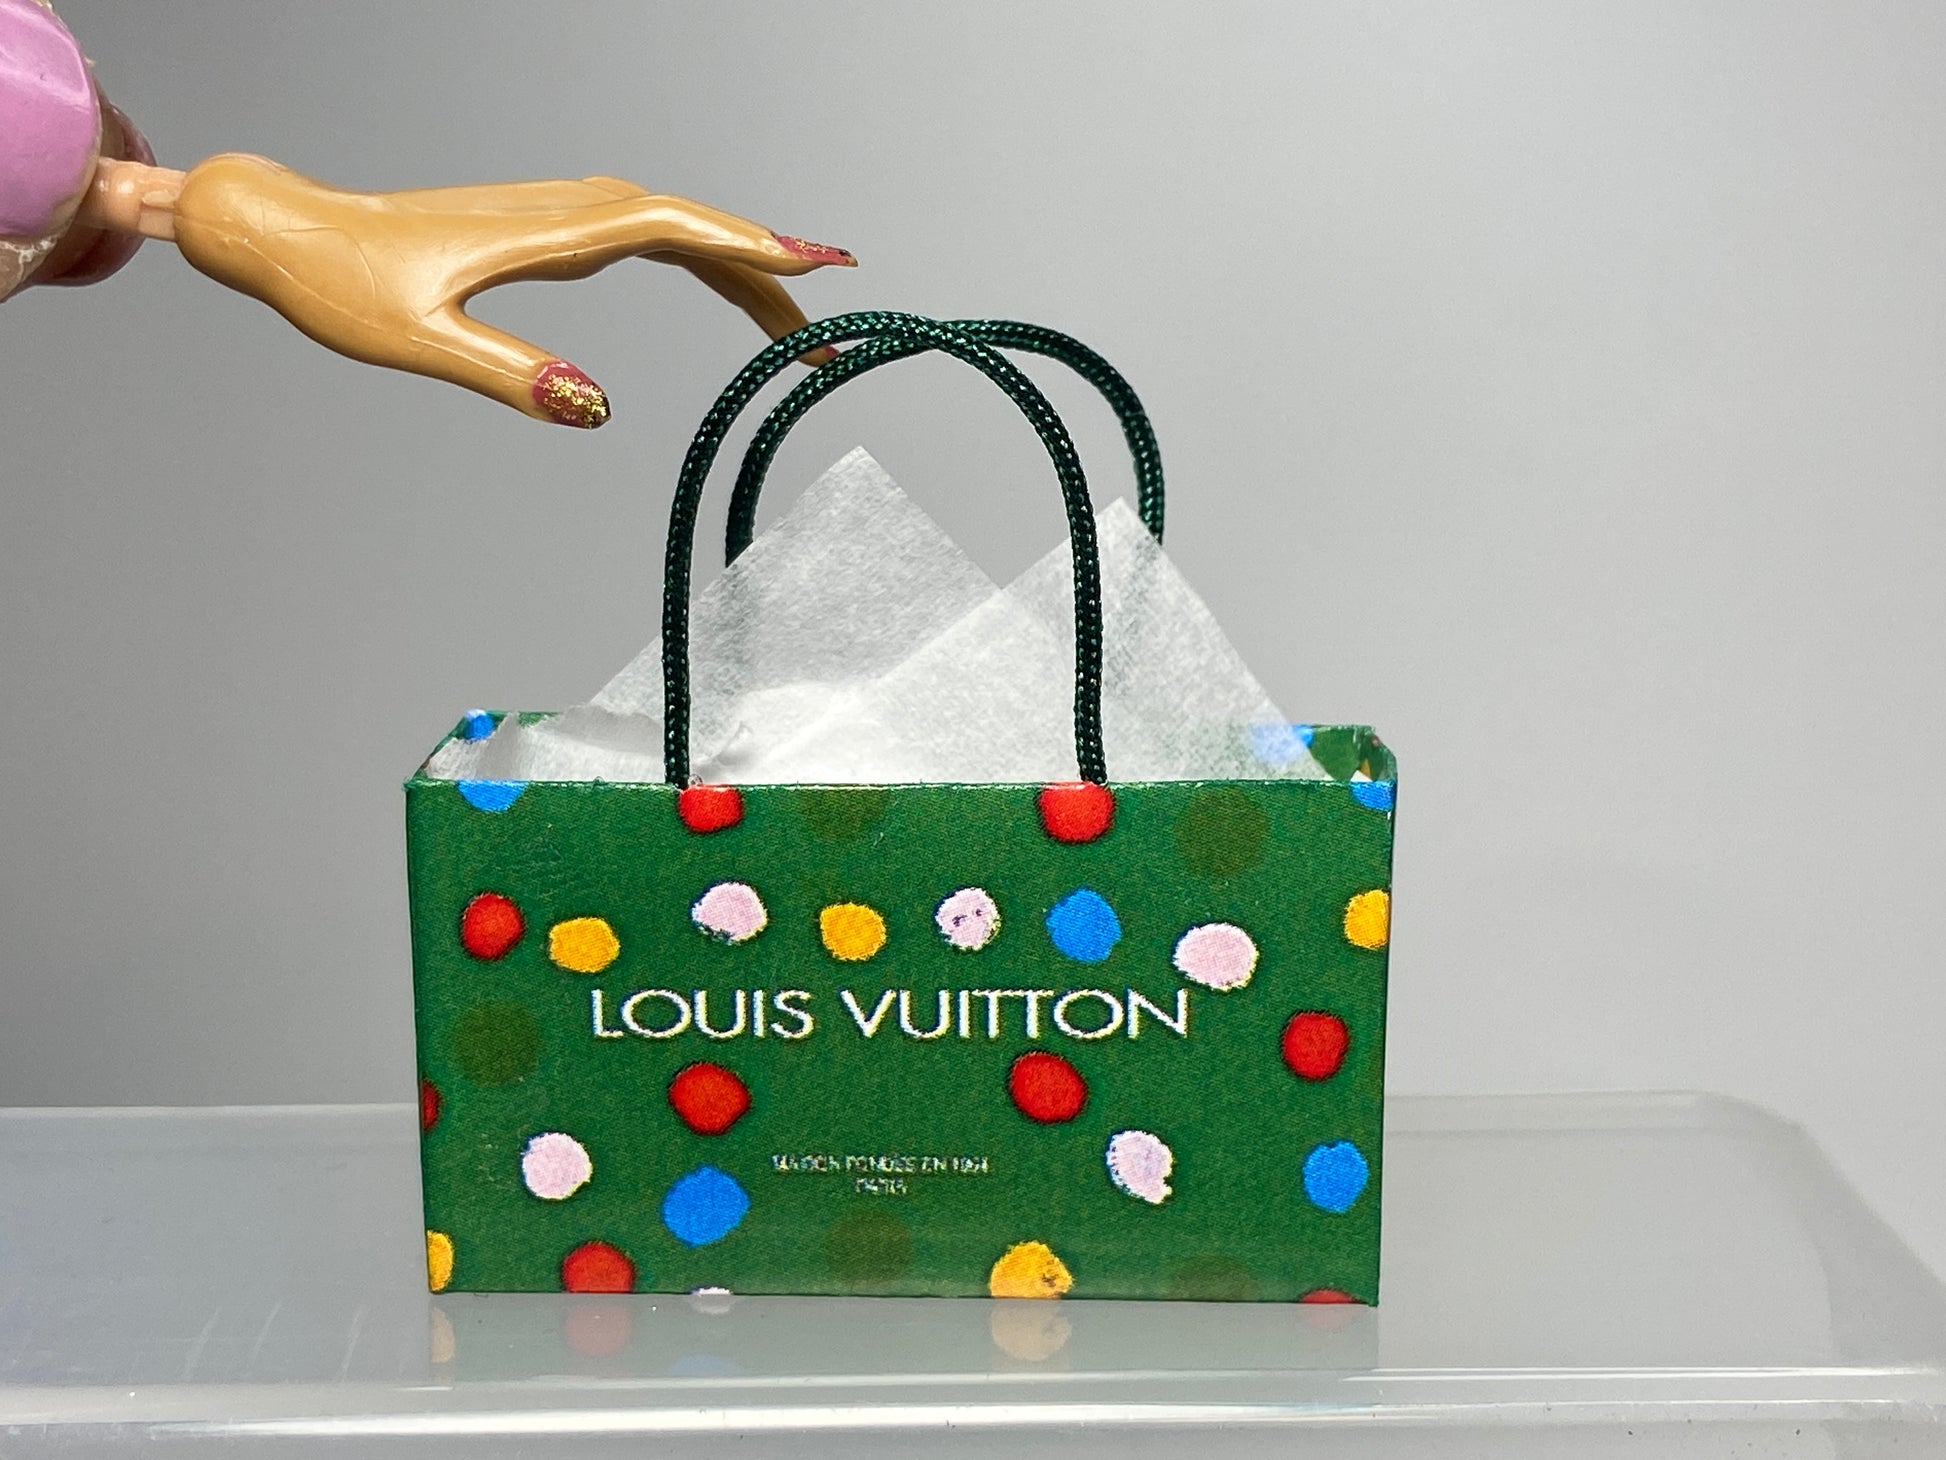 Louis Vuitton shopping spree! LOVE the art they put into LV